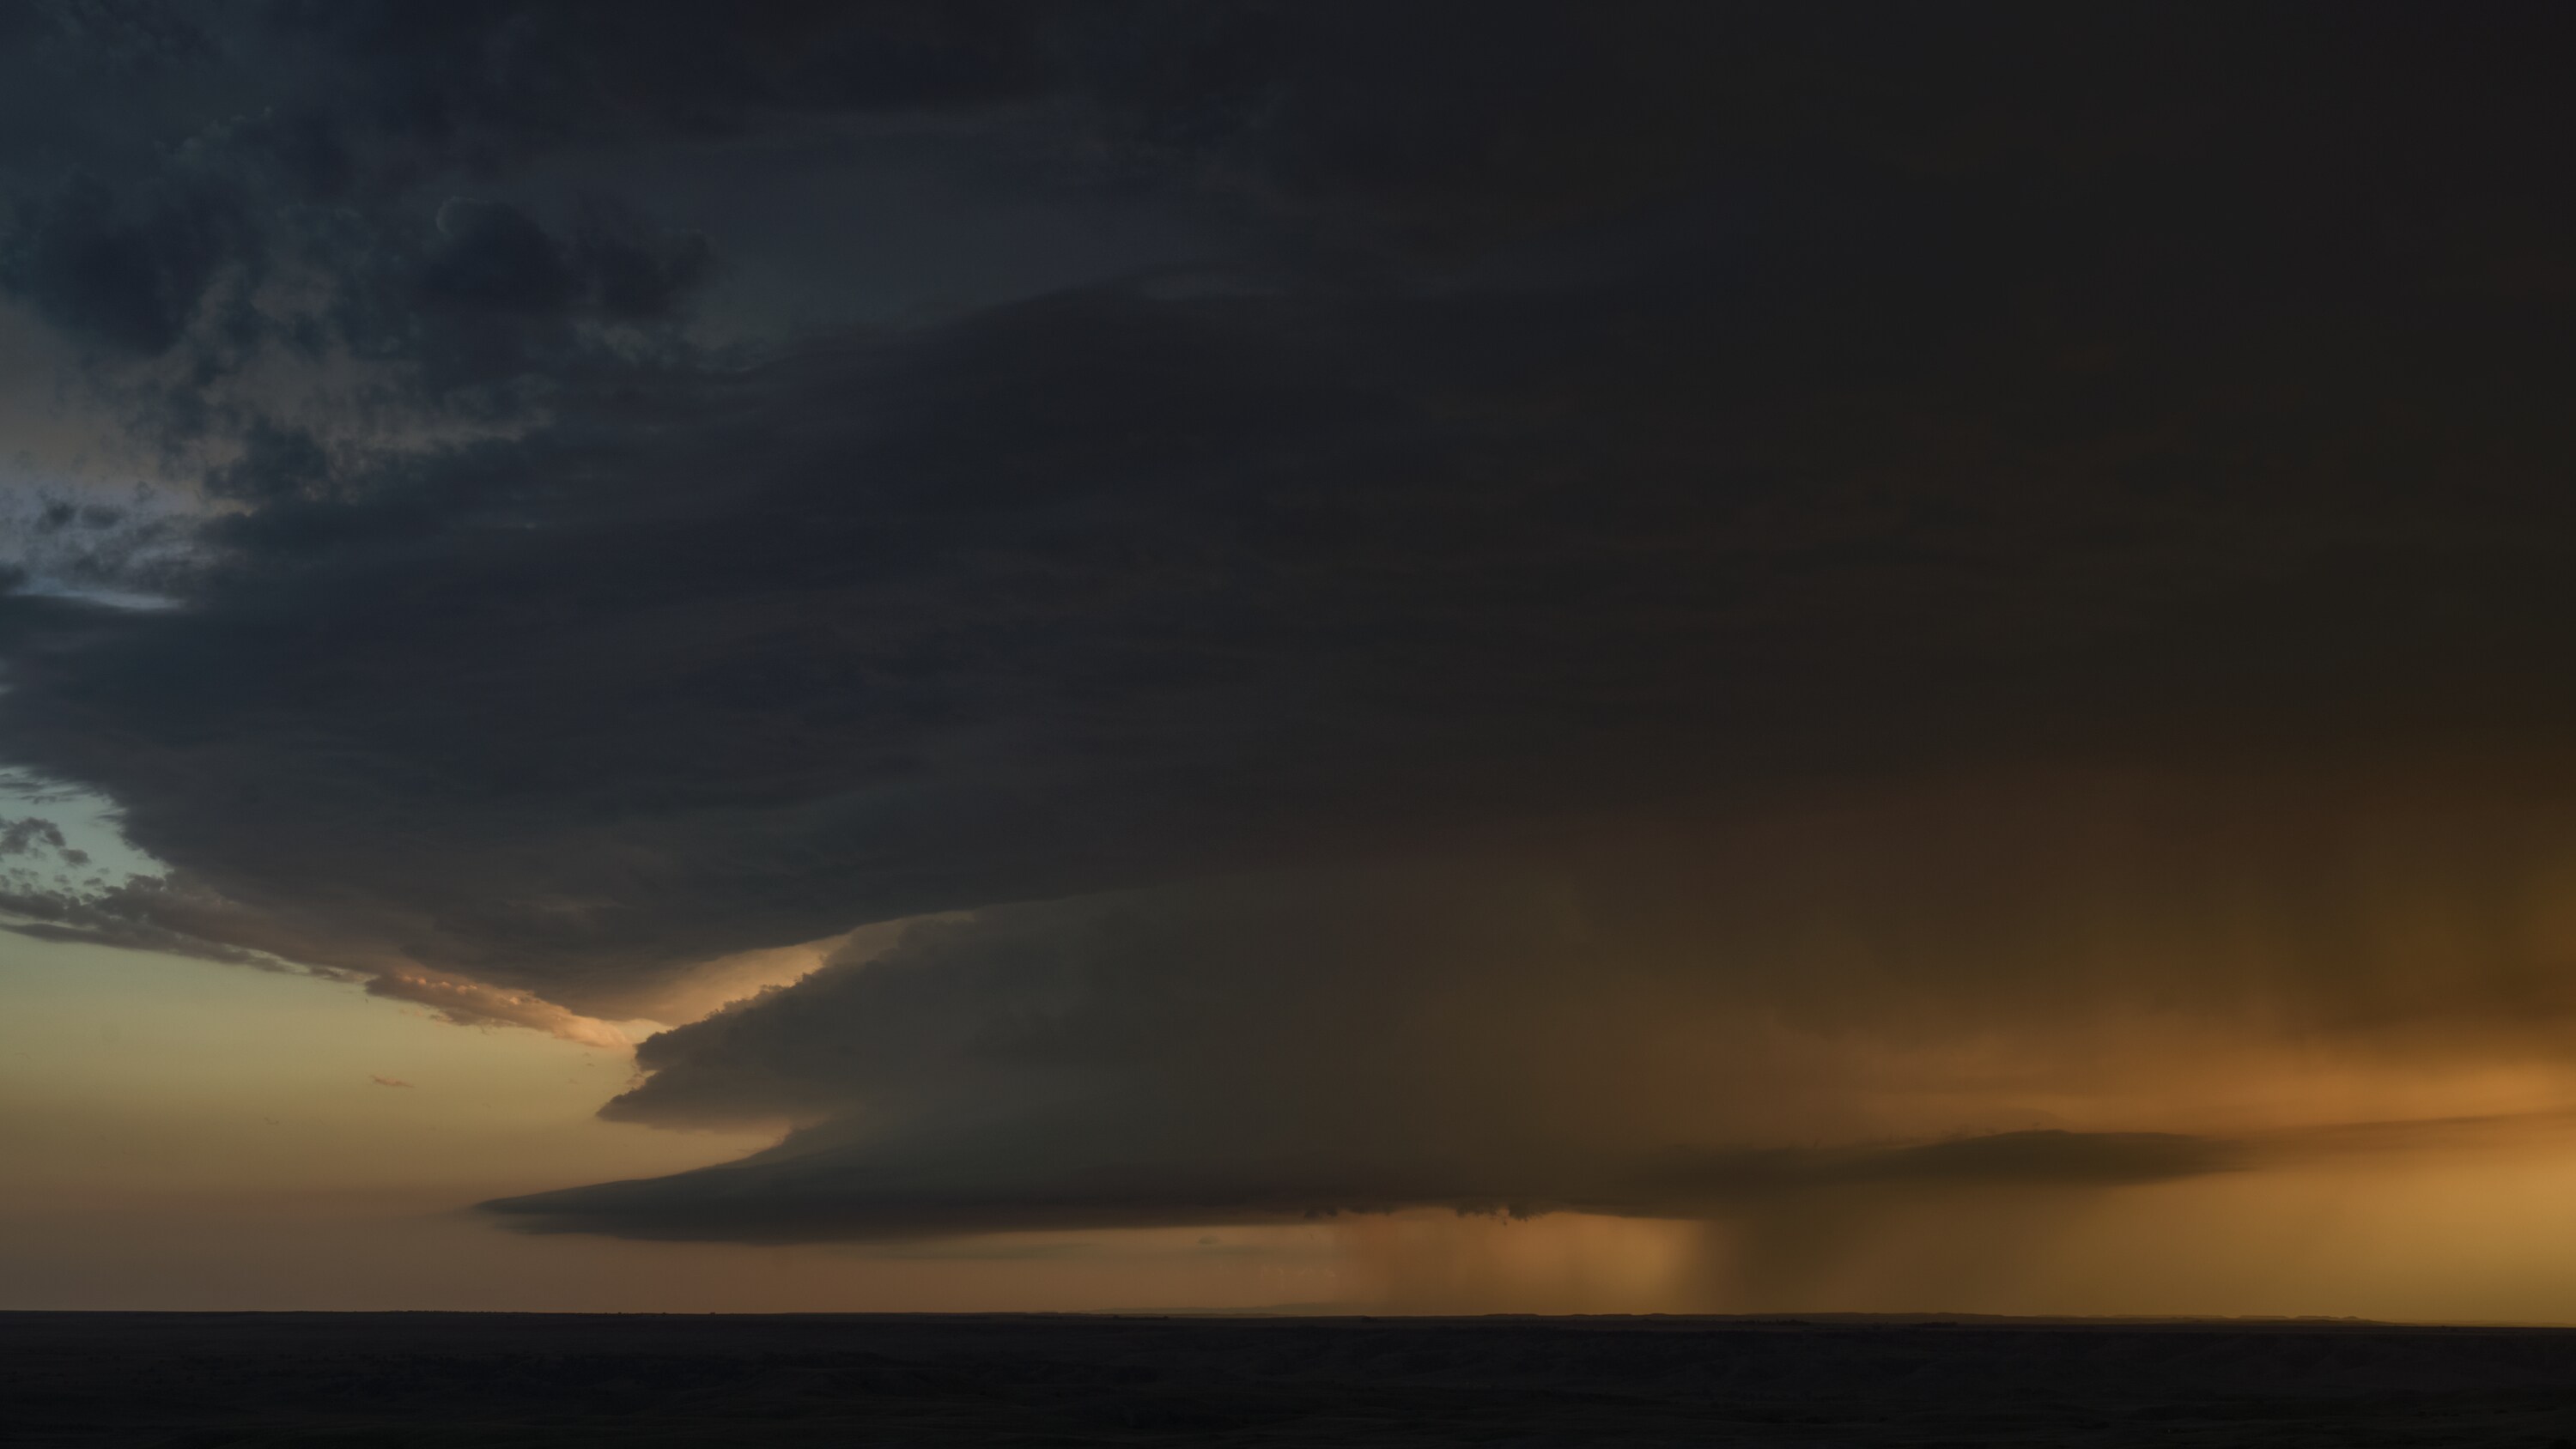 A supercell storm hits the Heartland. (National Geographic for Disney+)